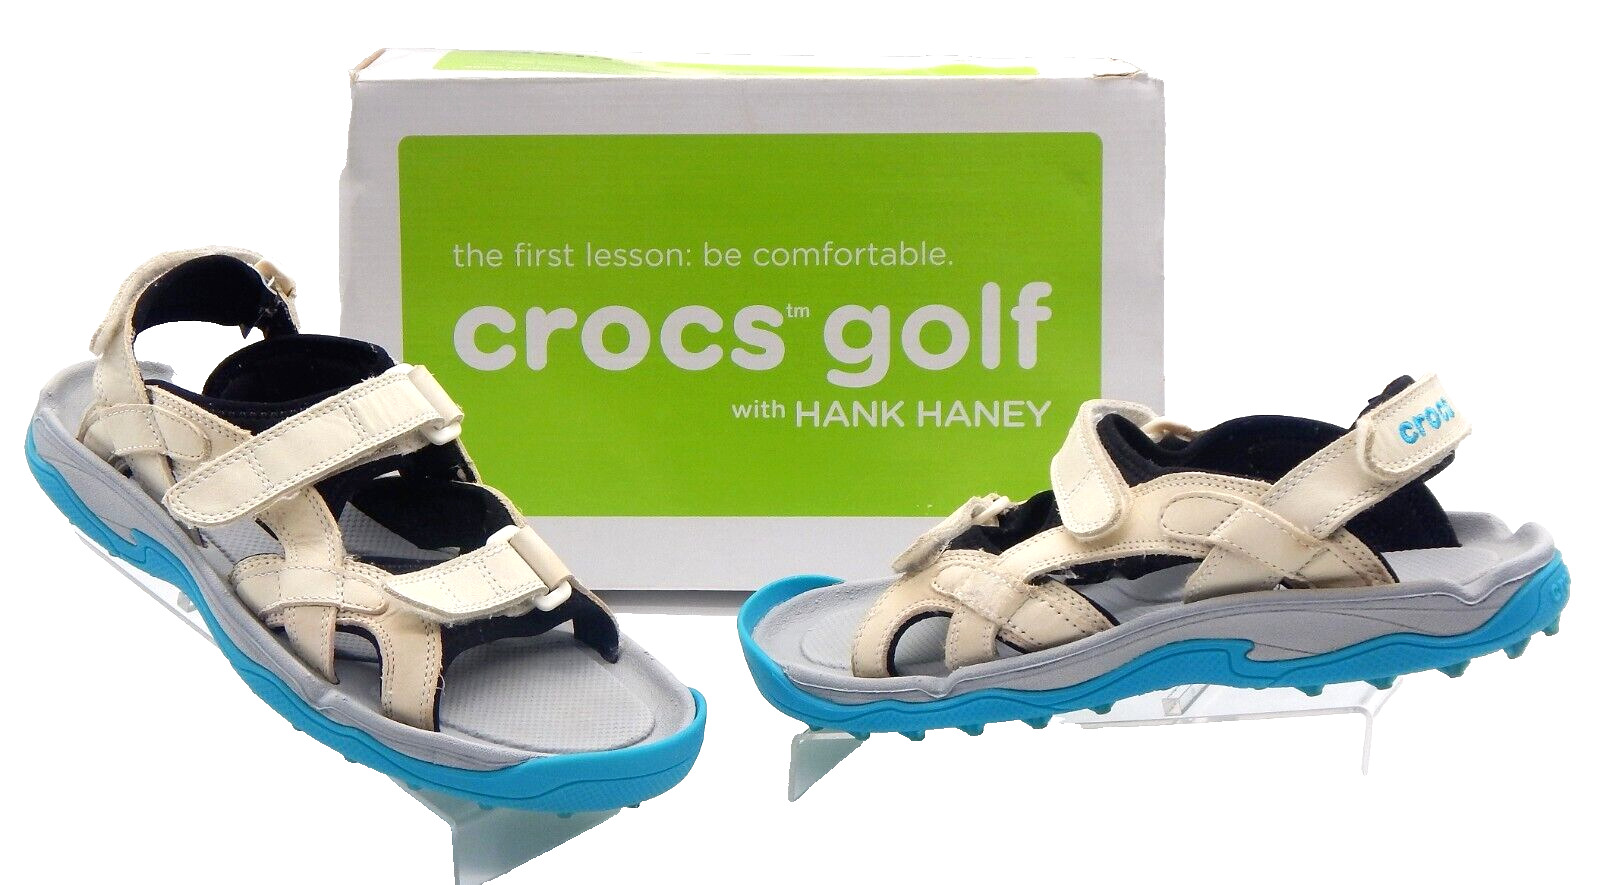 Crocs XTG Lopro Golf Sandals Spikeless Cleat Oyster Electric Blue Womens Size 9